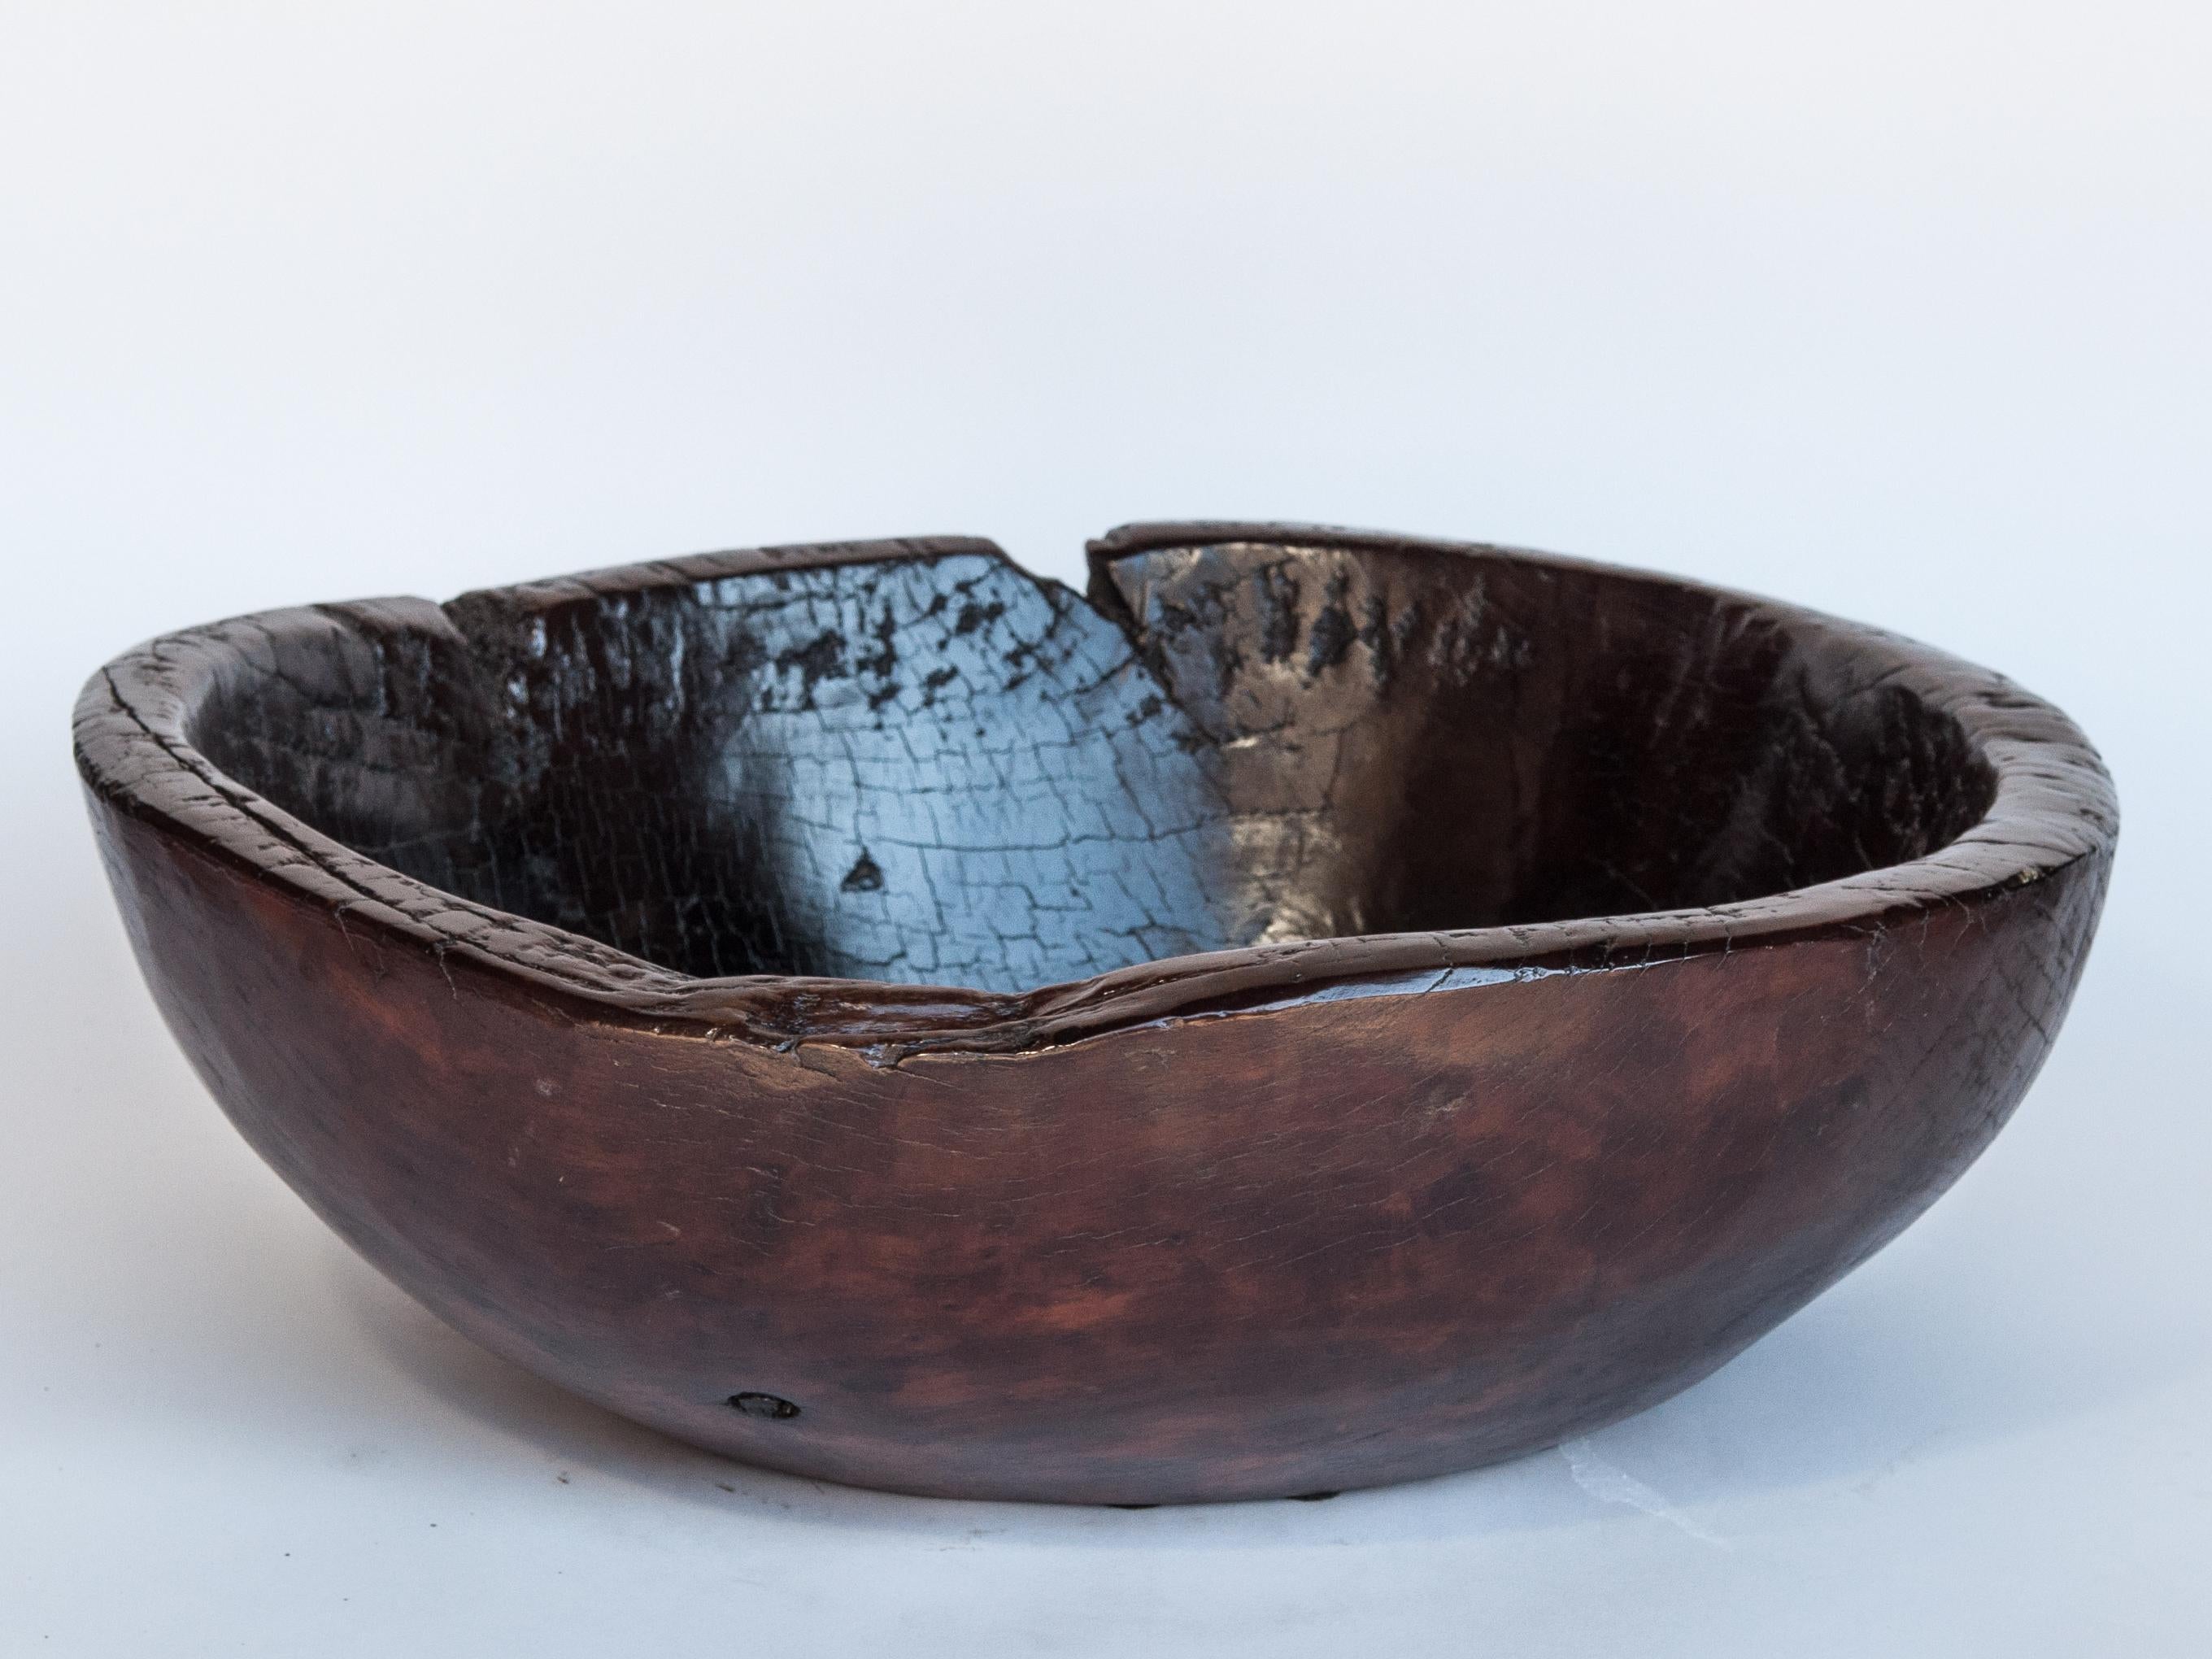 Hand-Crafted Old Tribal Wooden Bowl from the Nepal Himal, Mid-20th Century